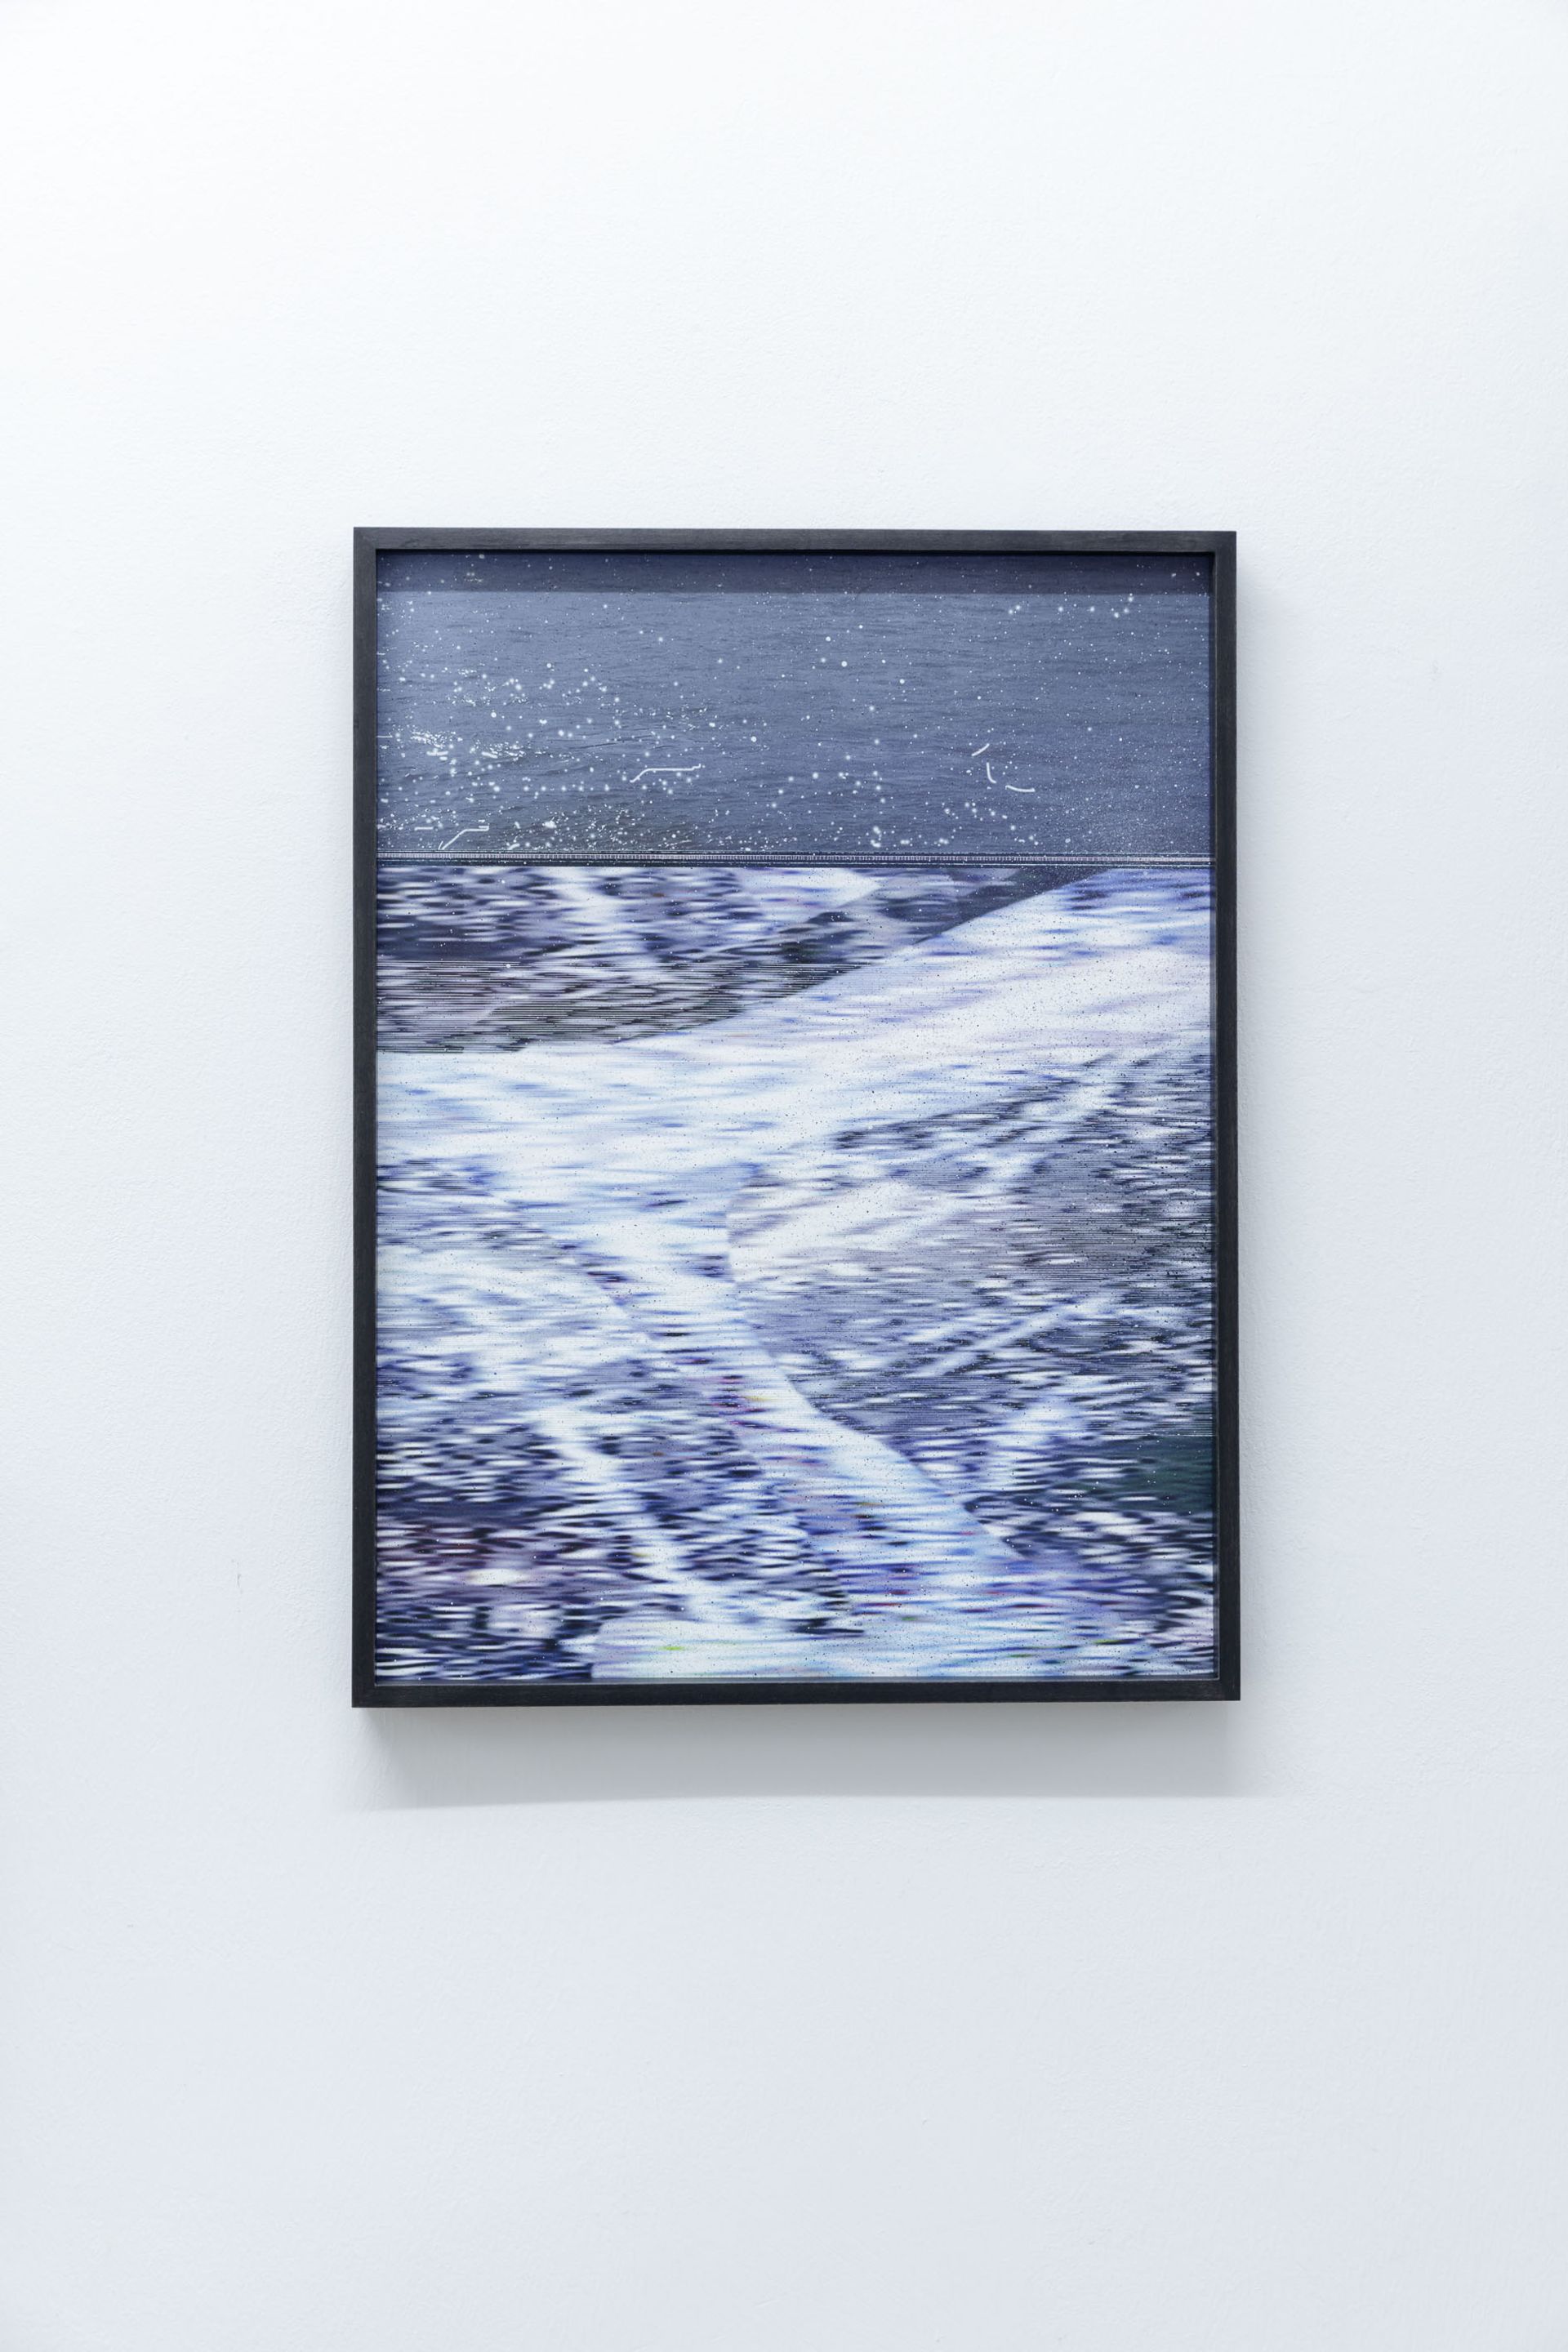 Anna Vogel, Wolf song, 2021, Lacquer on pigment prints, frame stained in dark anthracite, 40 x 30 cm, photo: Sebastian Kissel